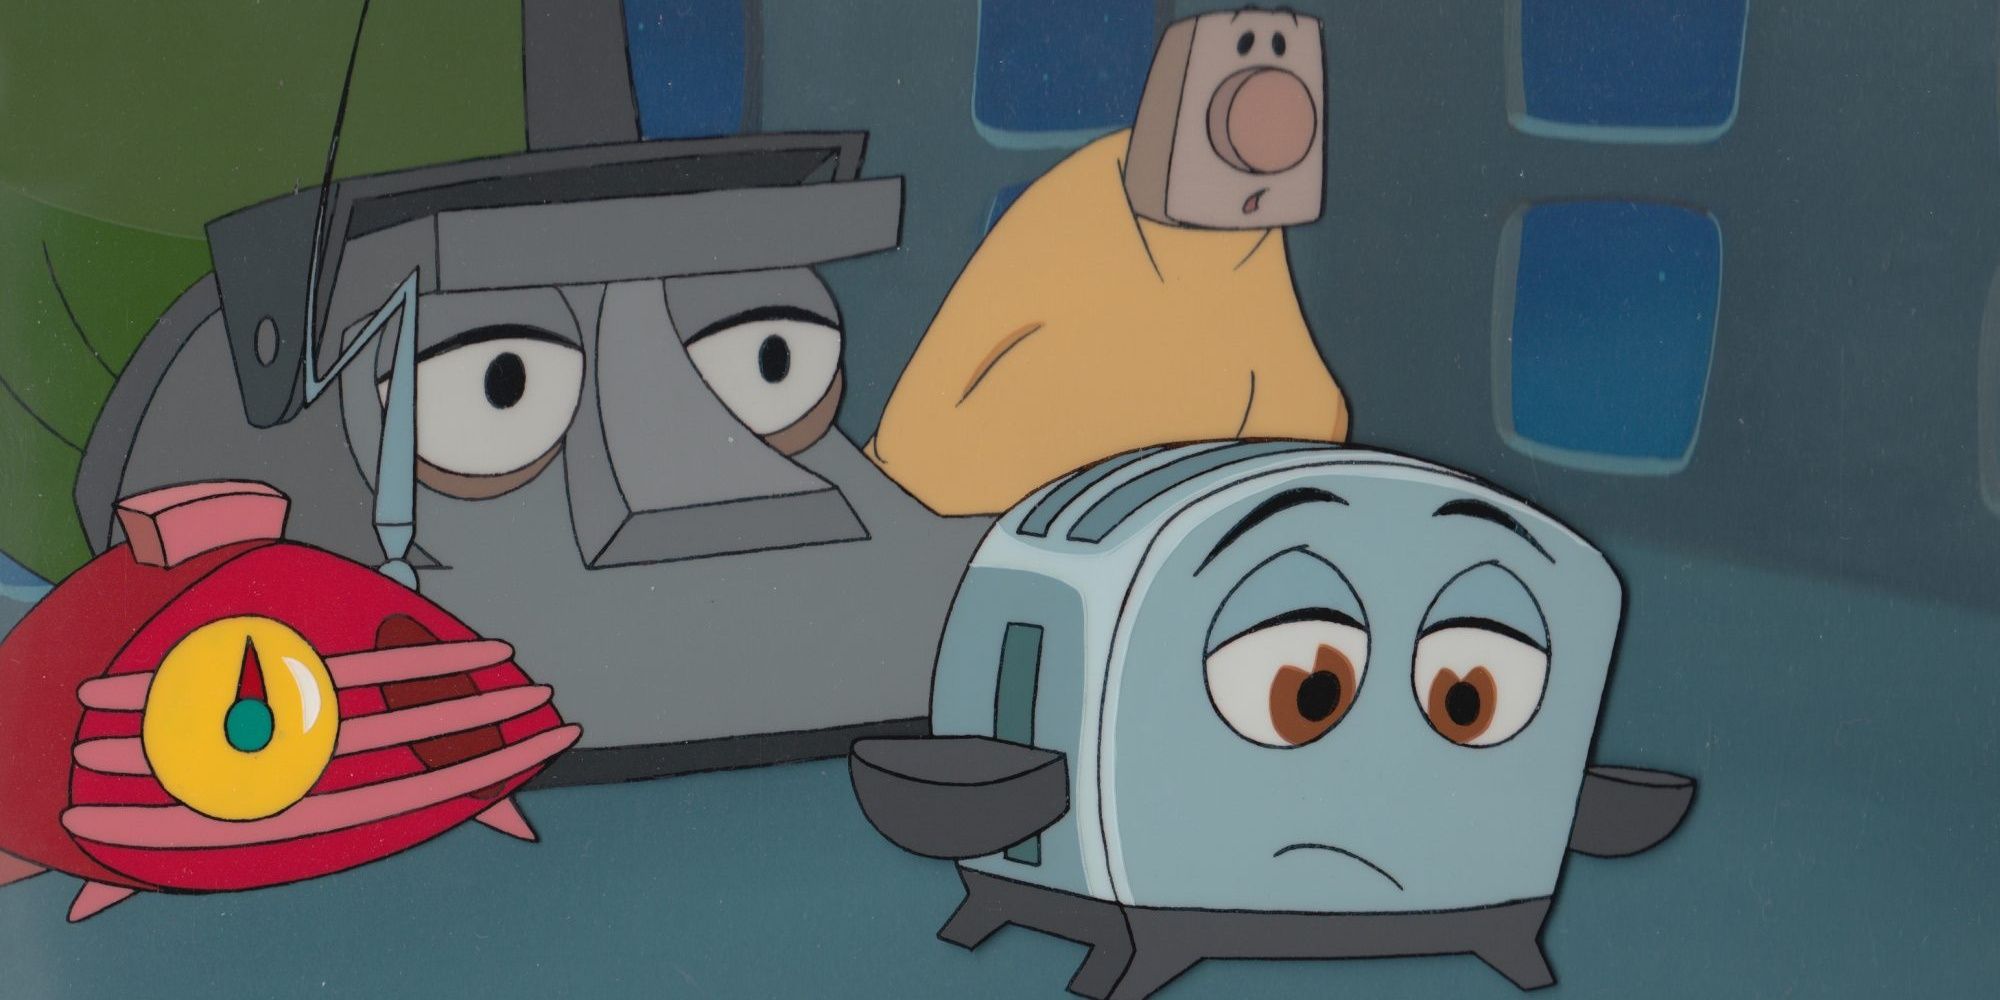 Toaster, Blanky, Kirby, and Radio in The Brave Little Toaster.